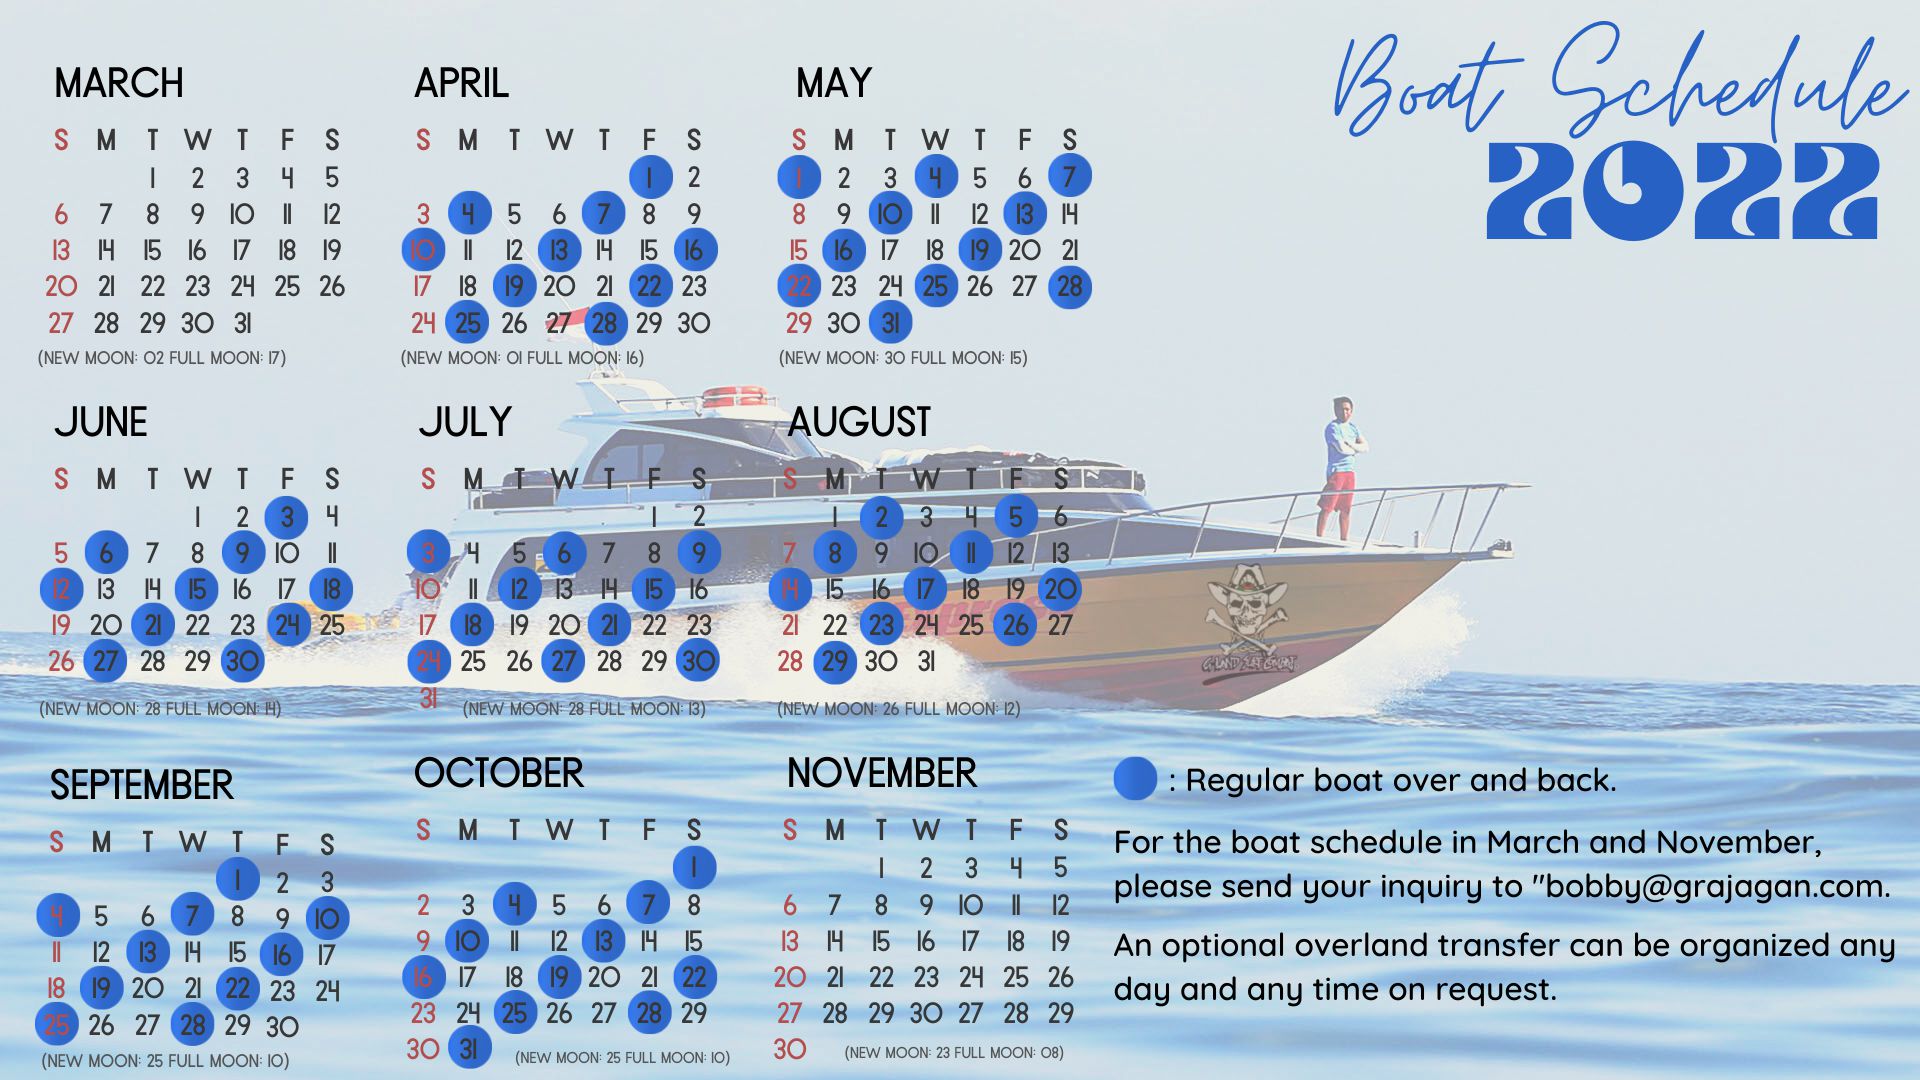 G-Land Bobby's Boat Schedule 2020